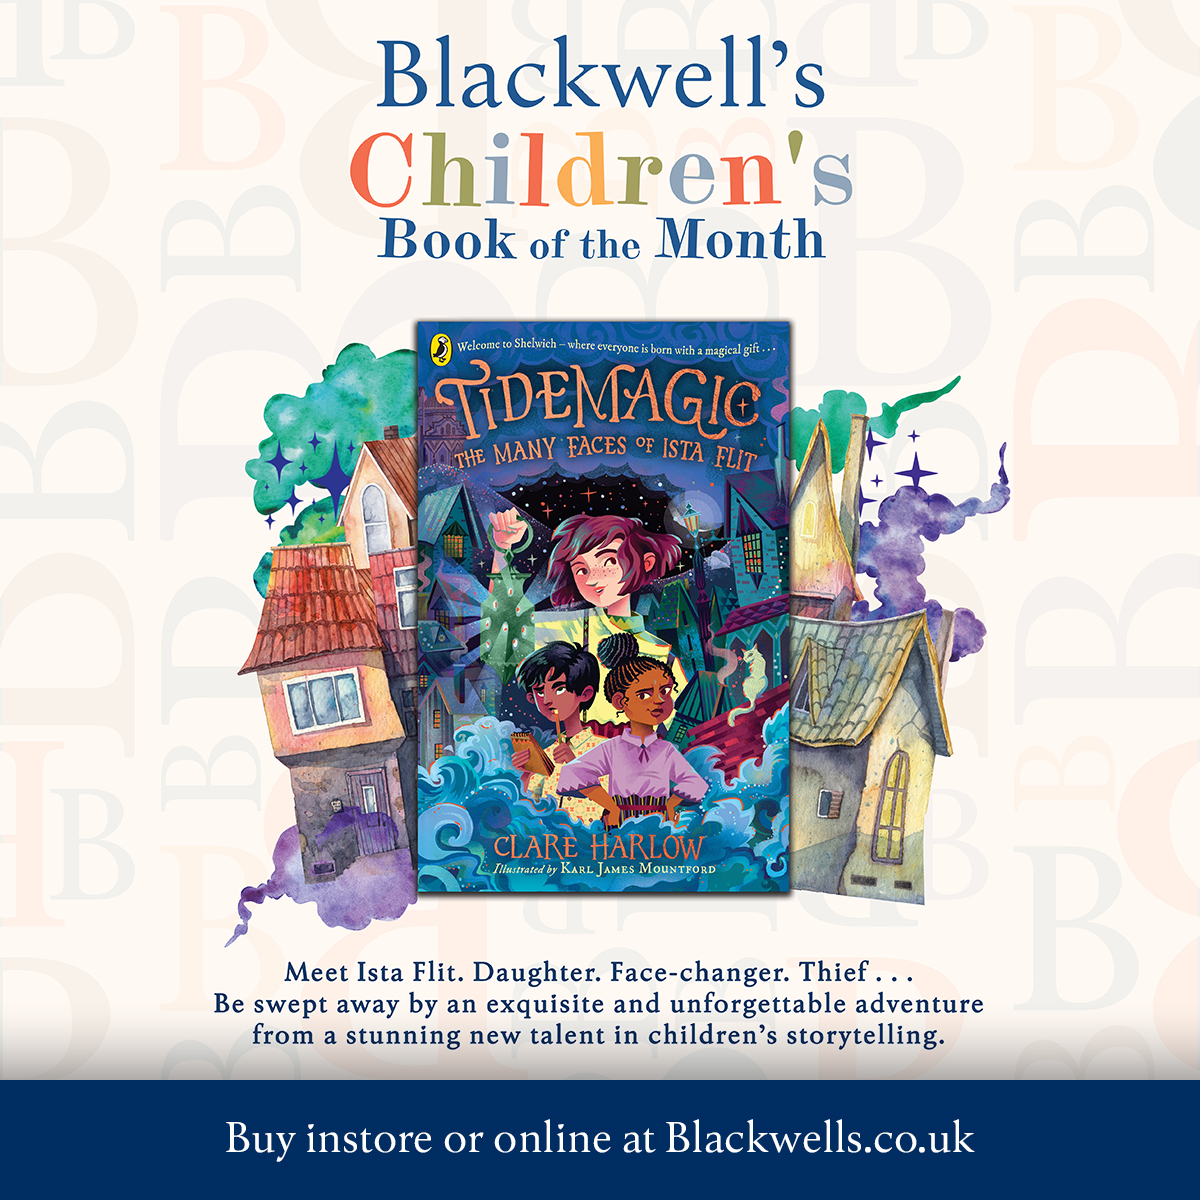 BLACKWELL'S CHILDREN'S BOOK OF THE MONTH Meet Ista Flit. Daughter. Face-changer. Thief... Be swept away by an unforgettable adventure by @clareharlow, a stunning new talent in children's storytelling. 📘 TIDEMAGIC: THE MANY FACES OF ISTA FLIT Blackwells.co.uk/bookshop/produ…